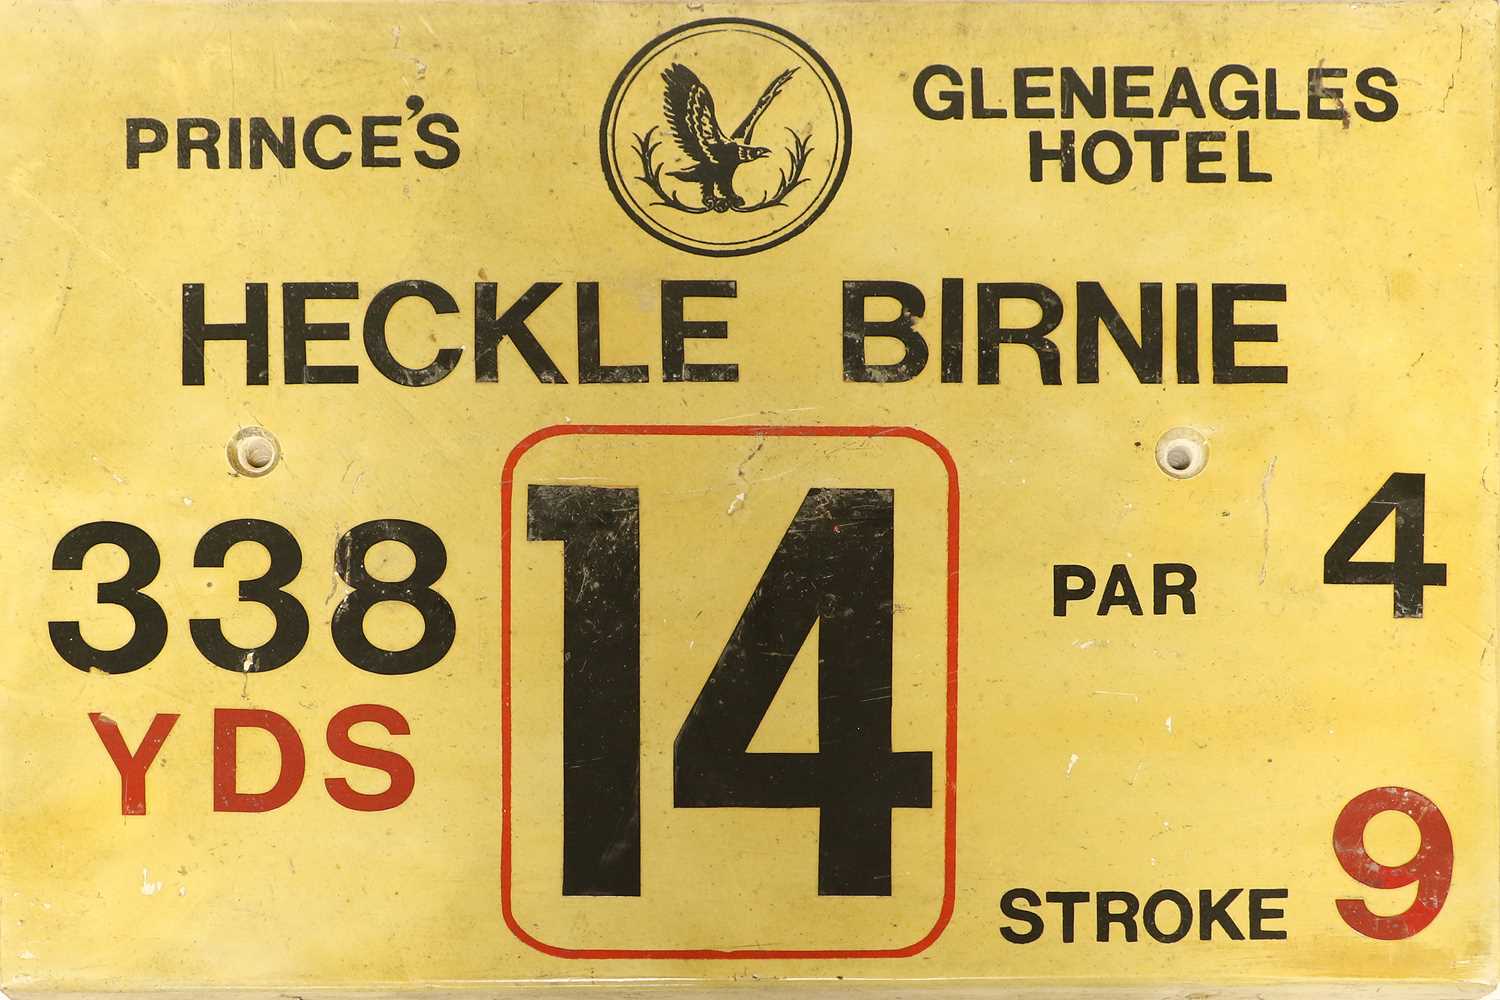 Golf Plaques A Full Set From Gleneagles Hotel Princes's Course - Image 16 of 19